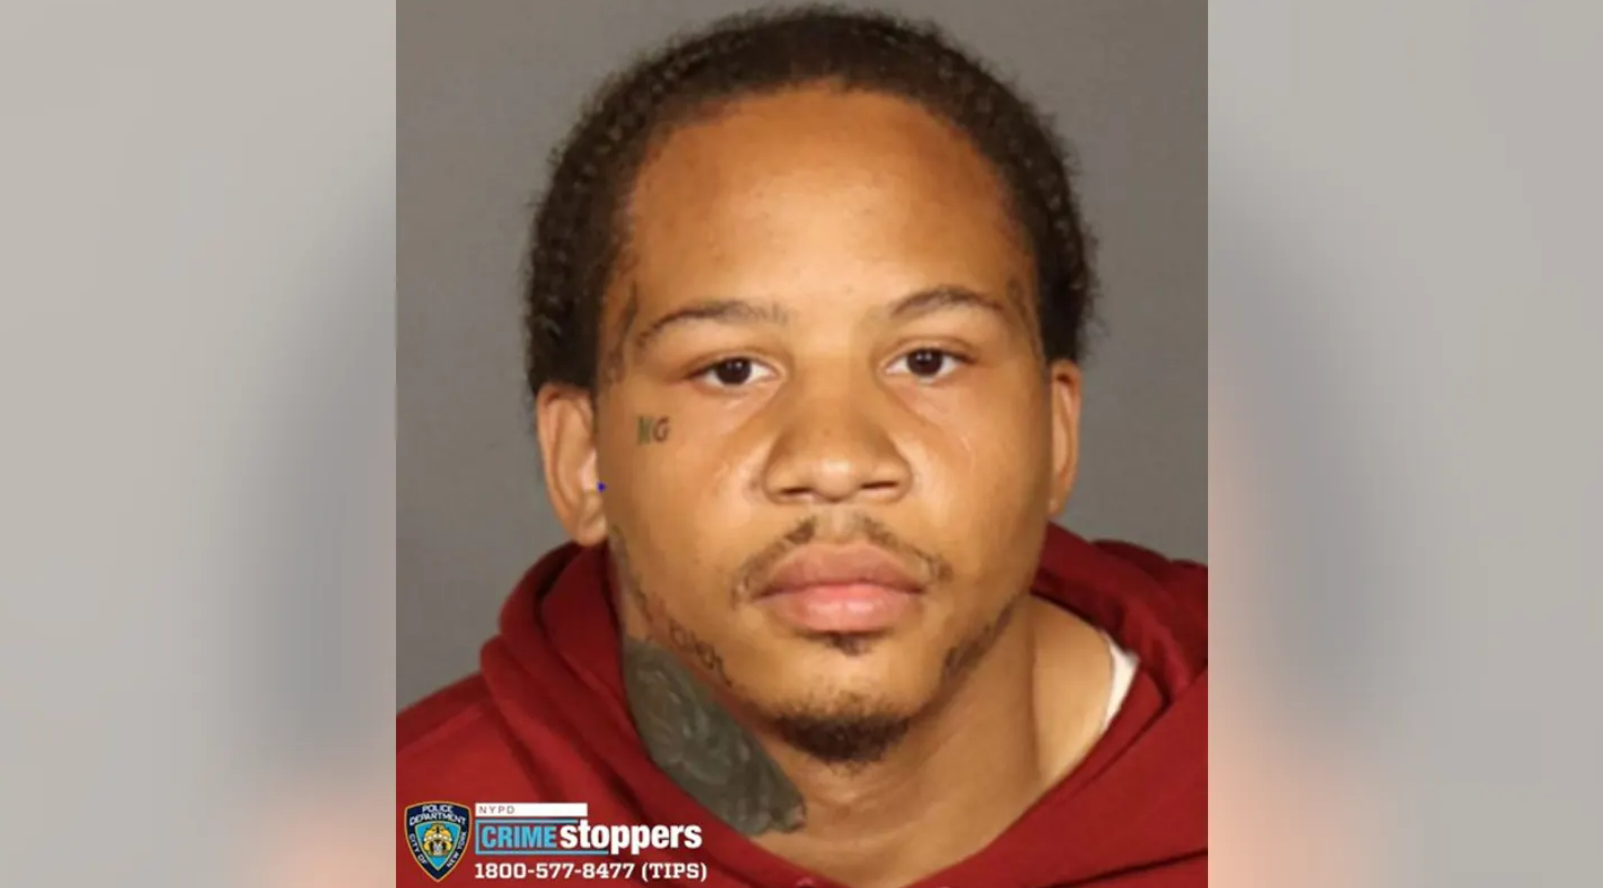 Sundance Oliver, 28, turned himself into New York law enforcement after he was suspected of carrying out a shooting spree that left two dead and one 96-year-old injured on Monday